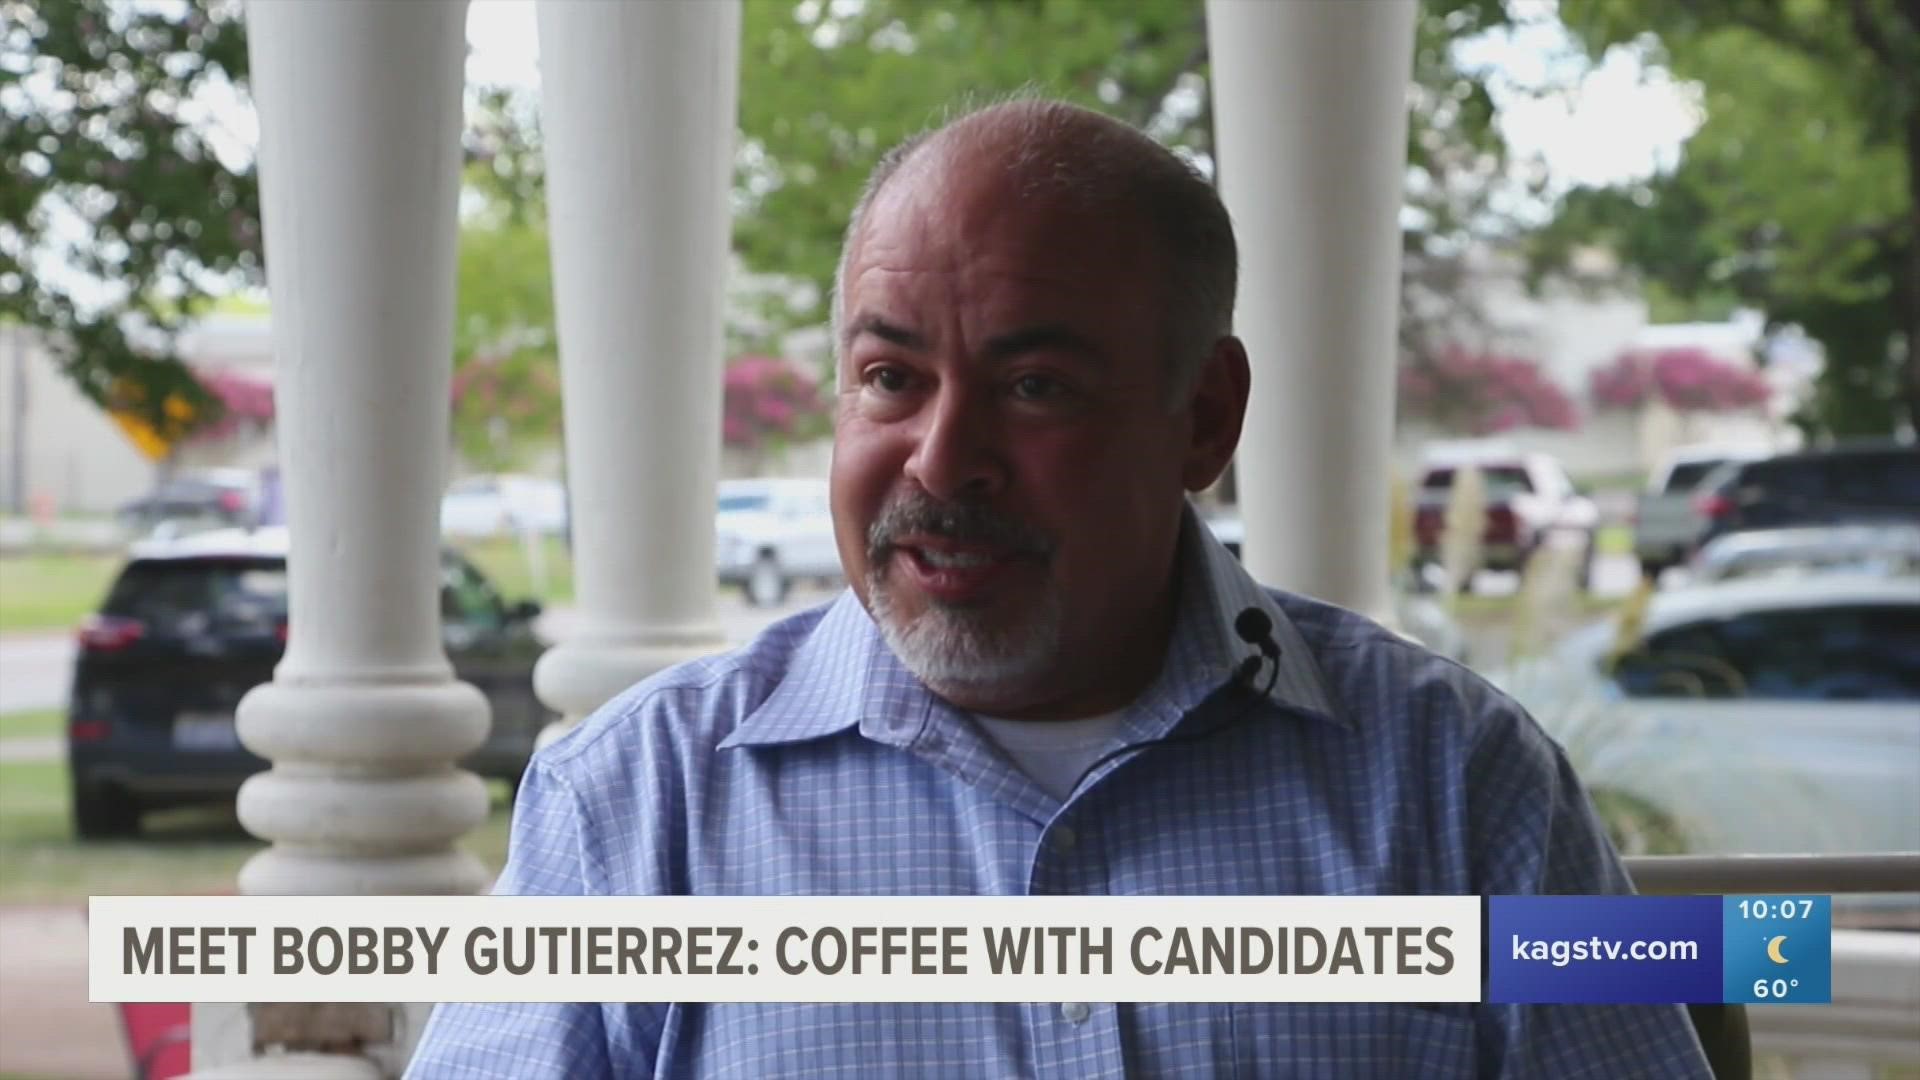 Bobby Gutierrez, a Bryan-College Station native, has served on the Bryan City Council for years and wants to continue to see his community grow.